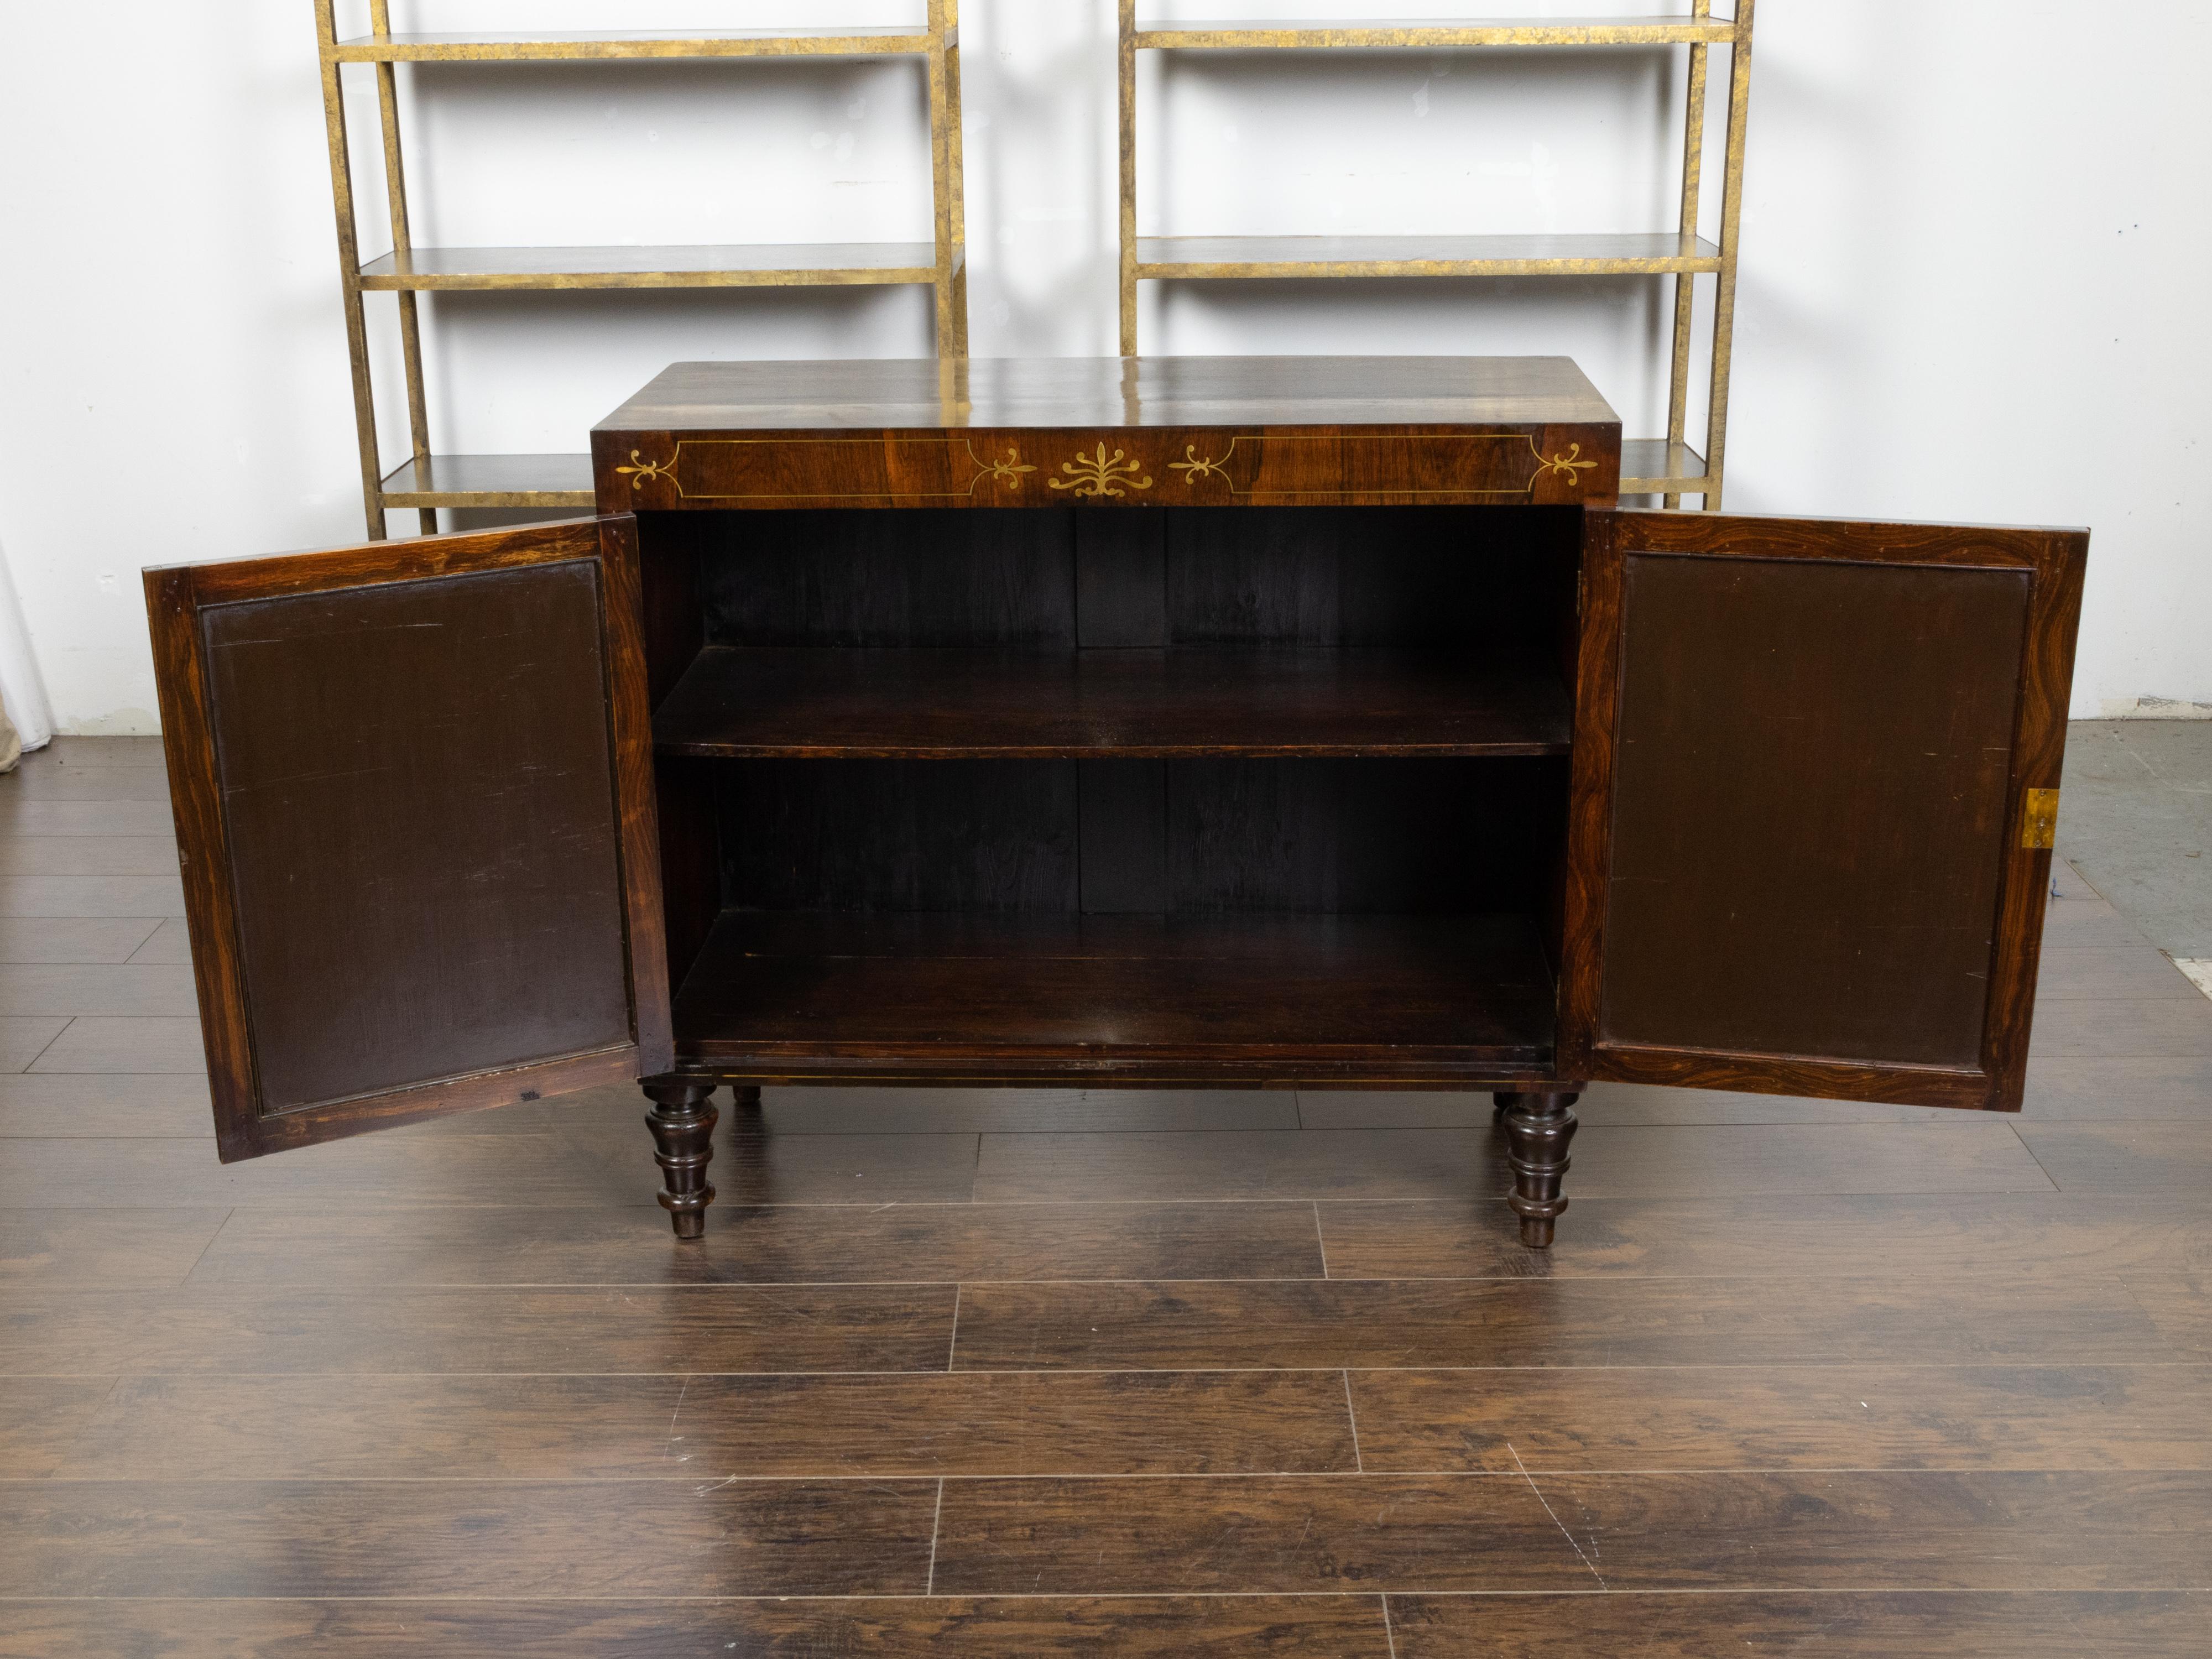 English 1840s Mahogany Cabinet with Leather Faux Books and Foliage Inlay For Sale 4